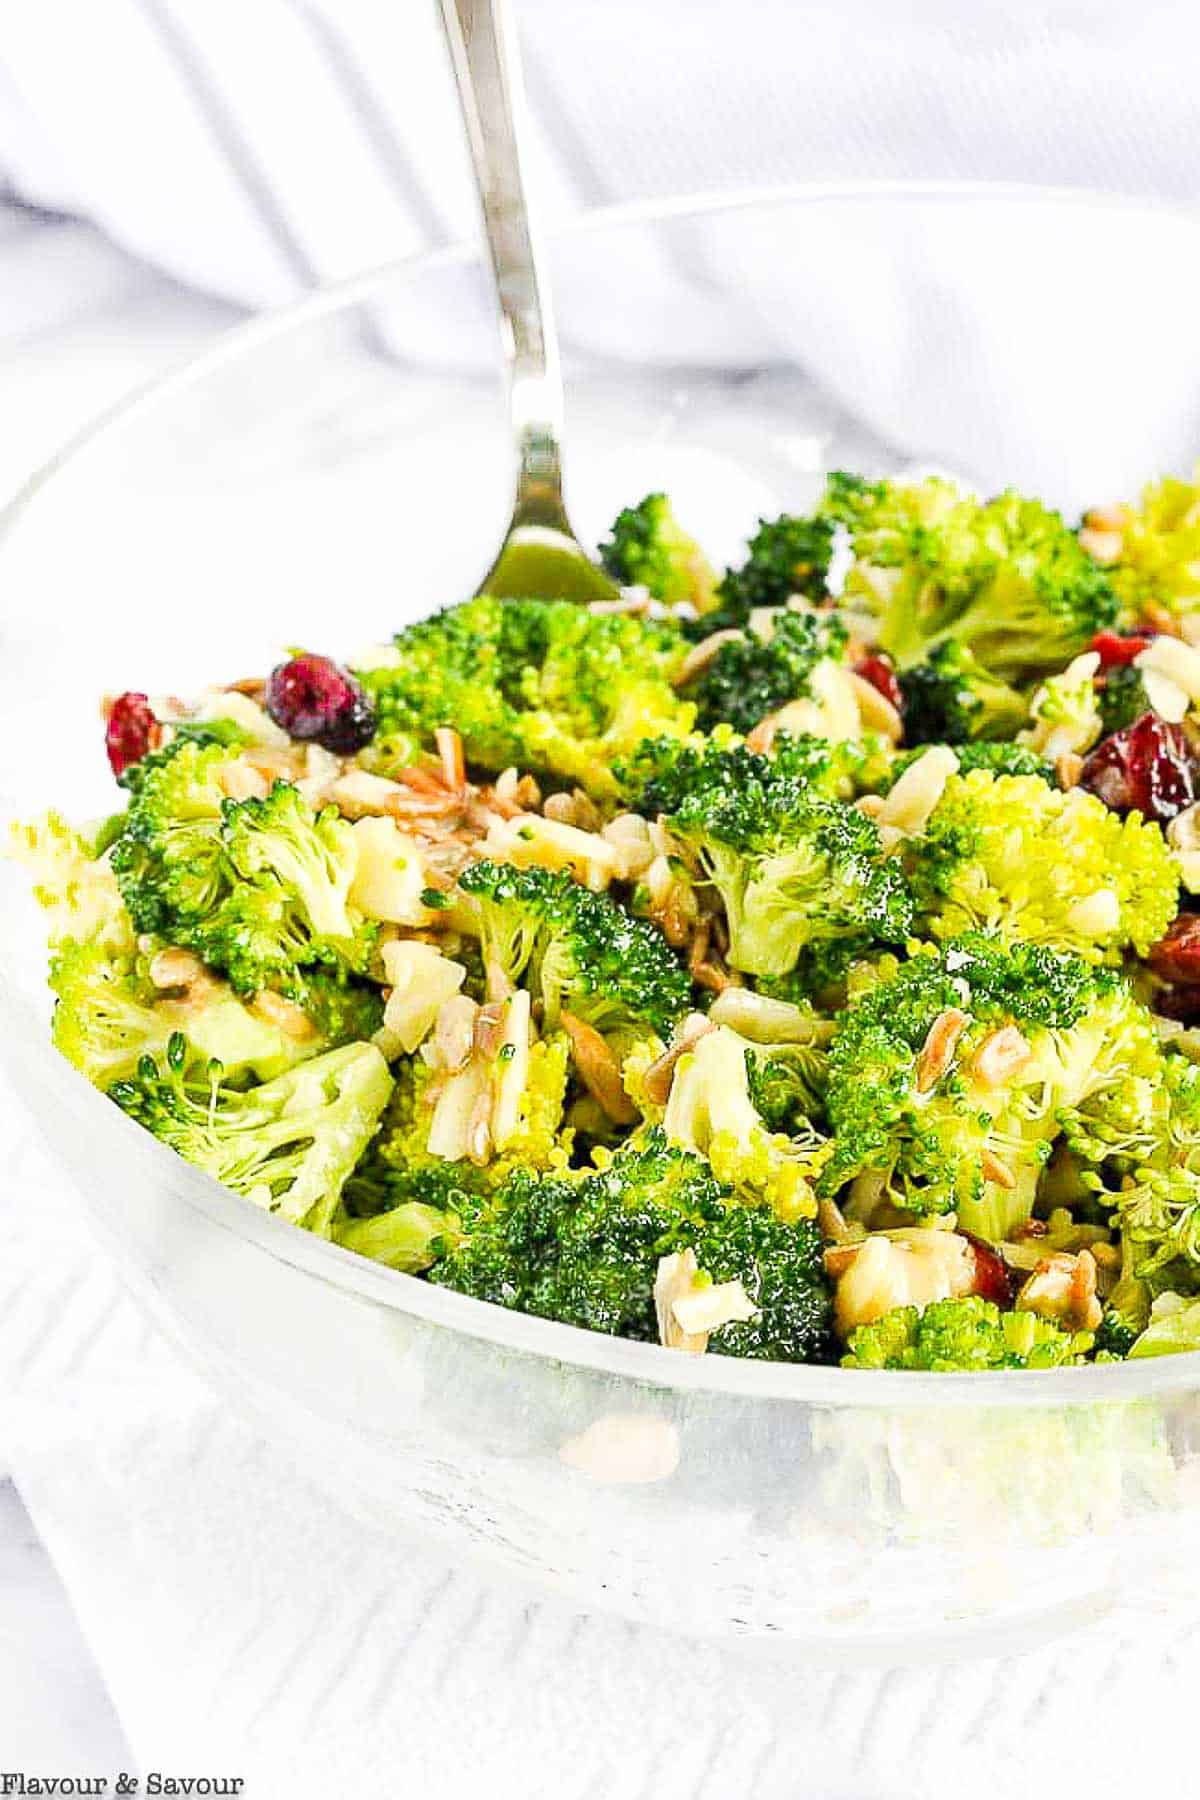 Honey-Dijon Broccoli Salad with Cranberries and Sunflower Seeds